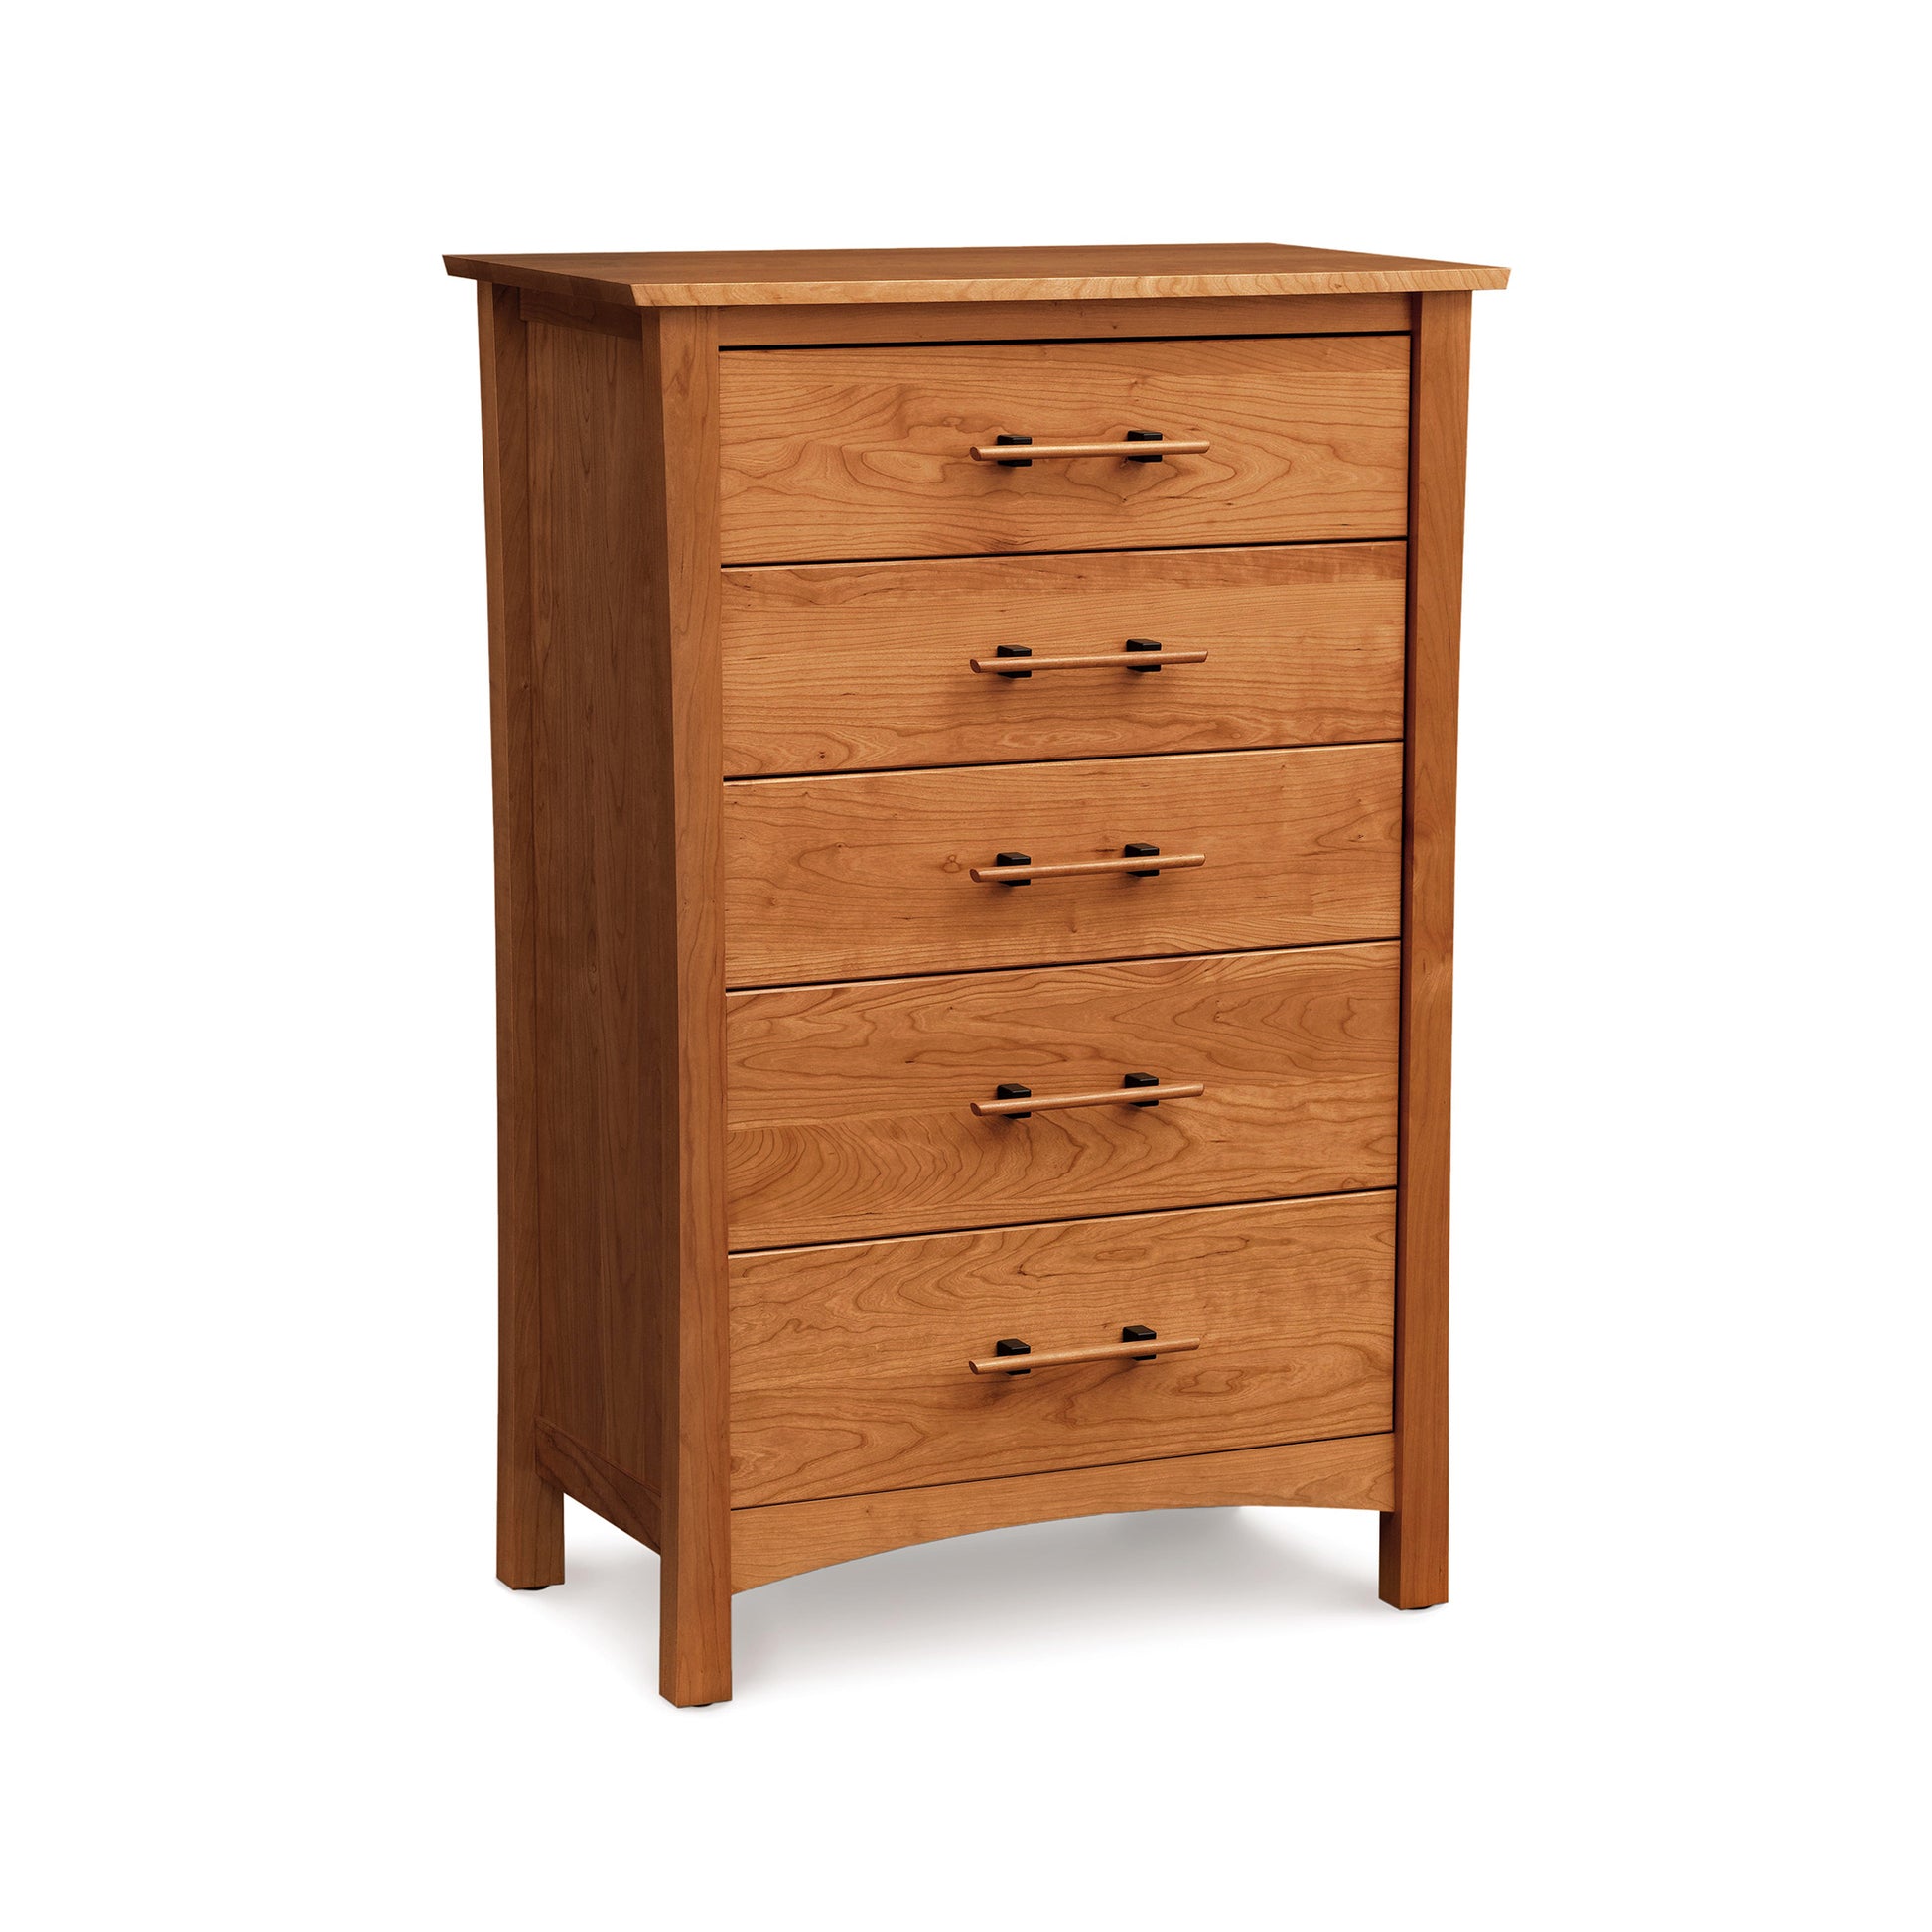 A Monterey 5-Drawer Chest by Copeland Furniture with metal handles, isolated on a white background.